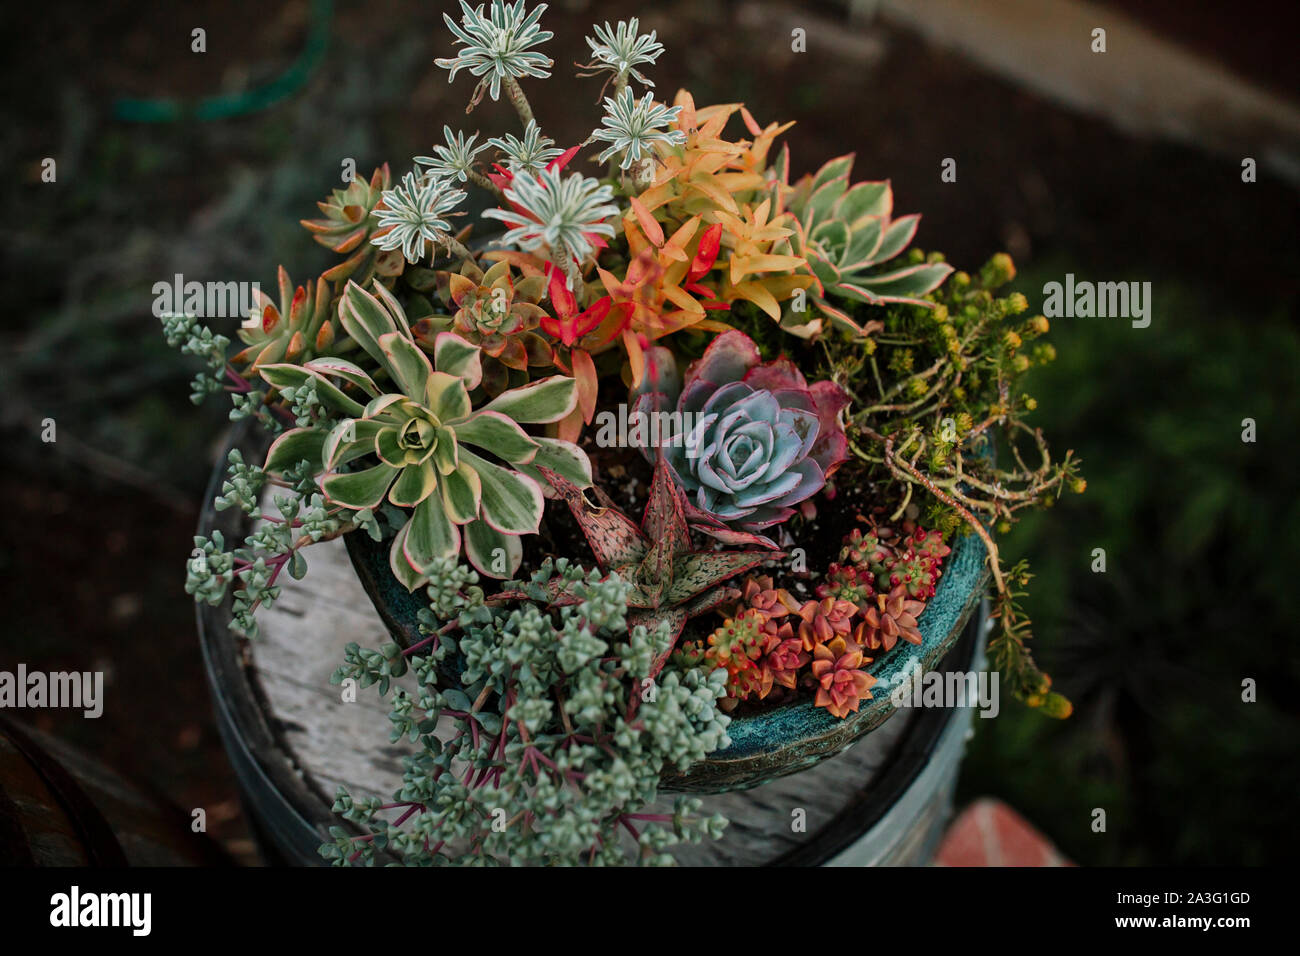 Colorful succulent plants in ceramic pot in wooden barrel Stock Photo